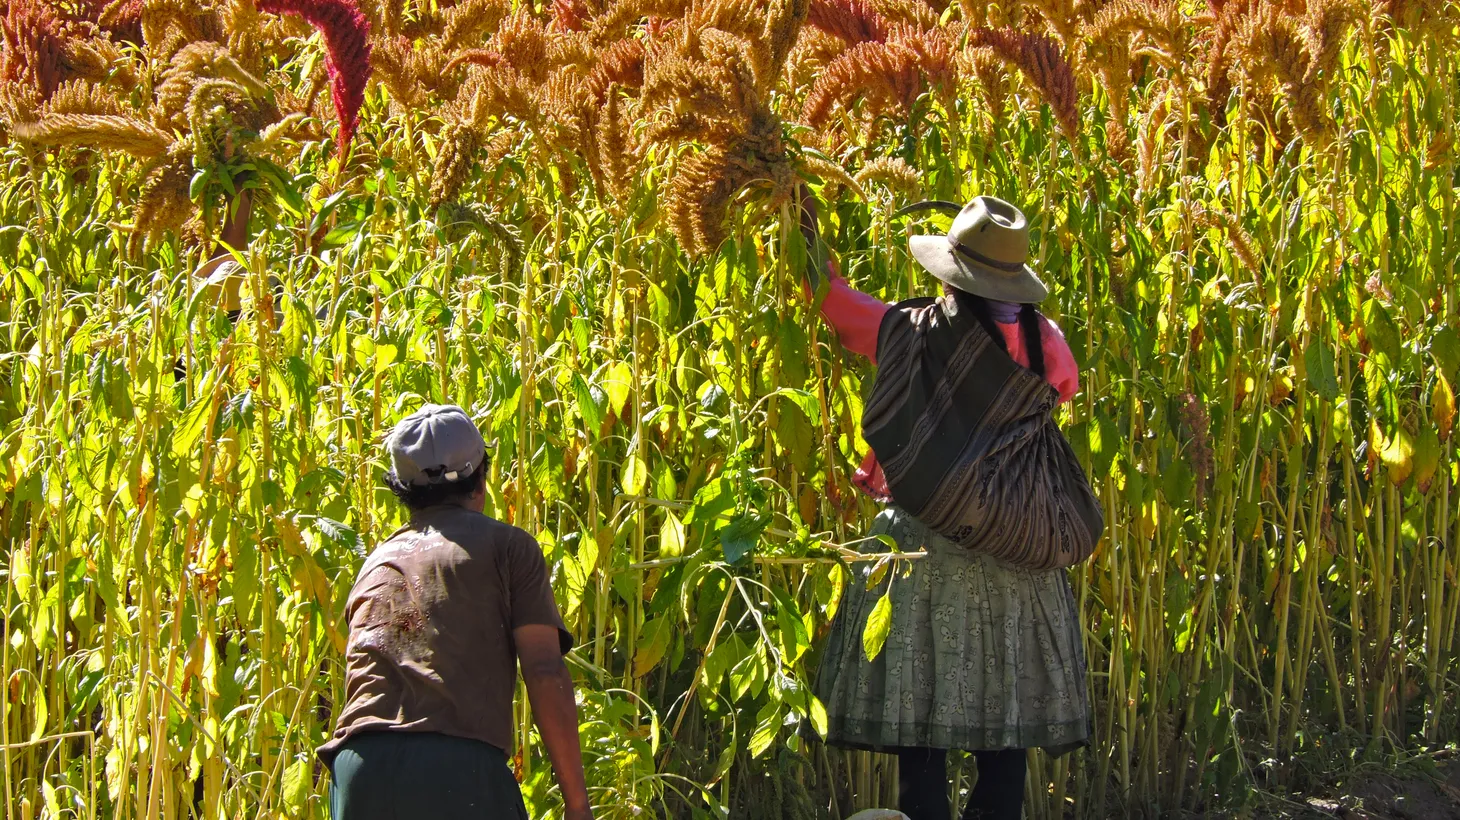 Dressed in traditional clothing, a man and woman harvest quinoa using organic methods.